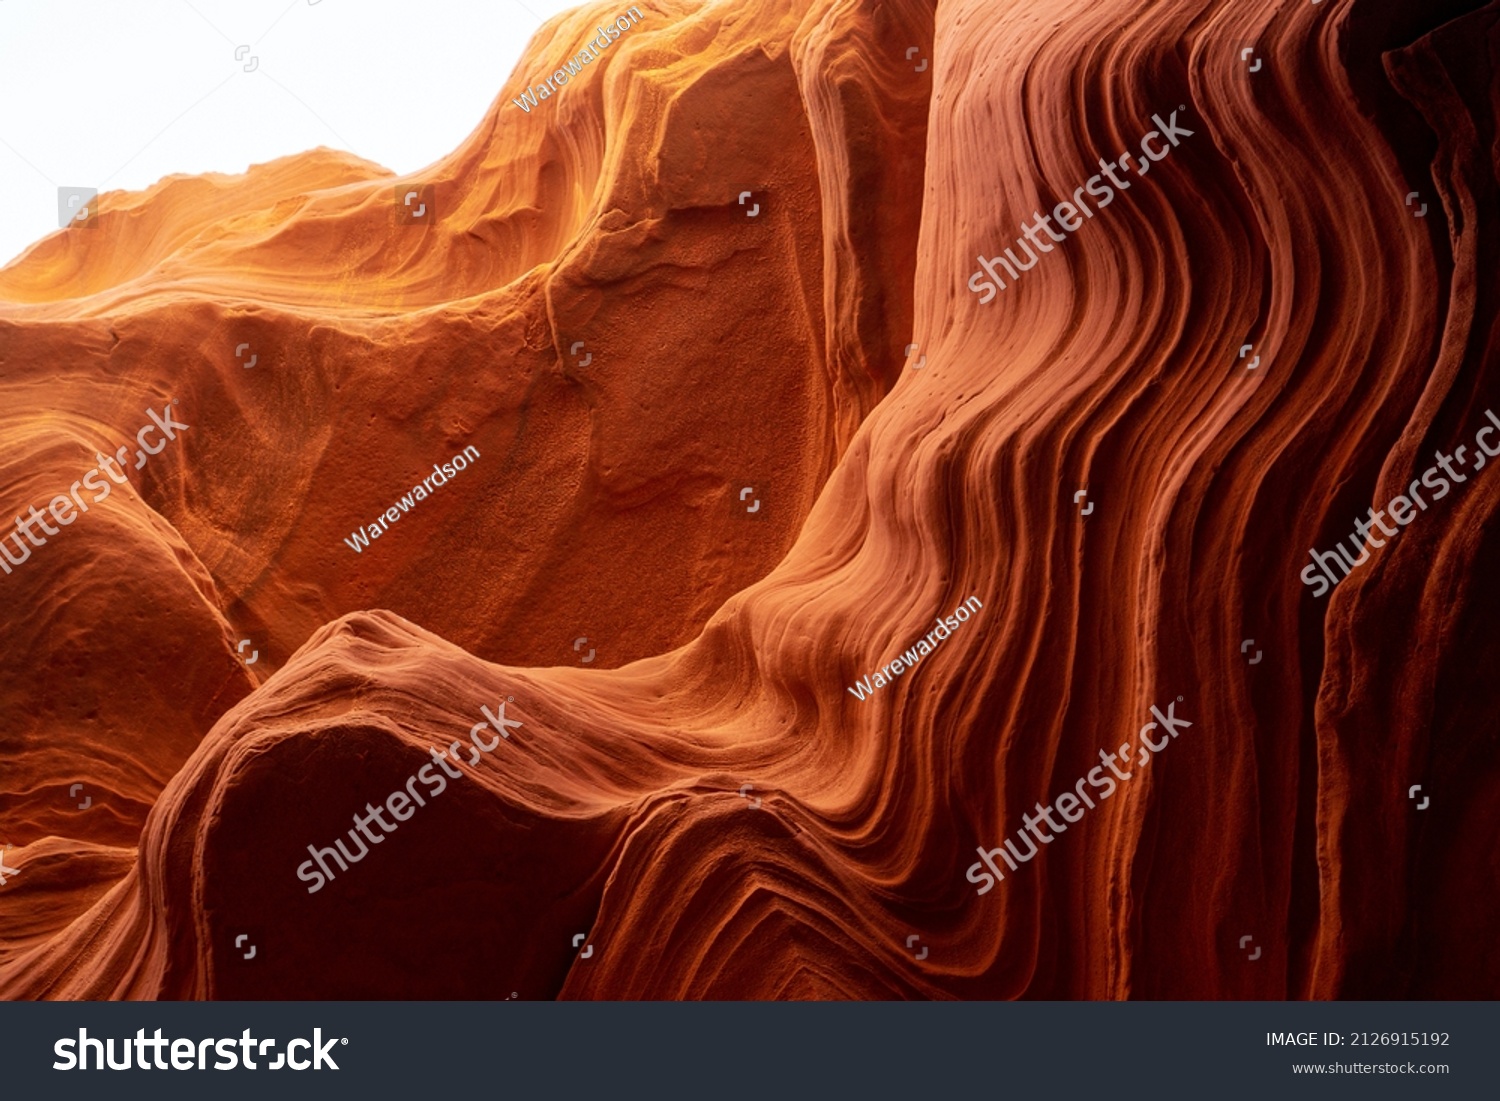 Textured orange sandstone from Lower Antelope Canyon #2126915192